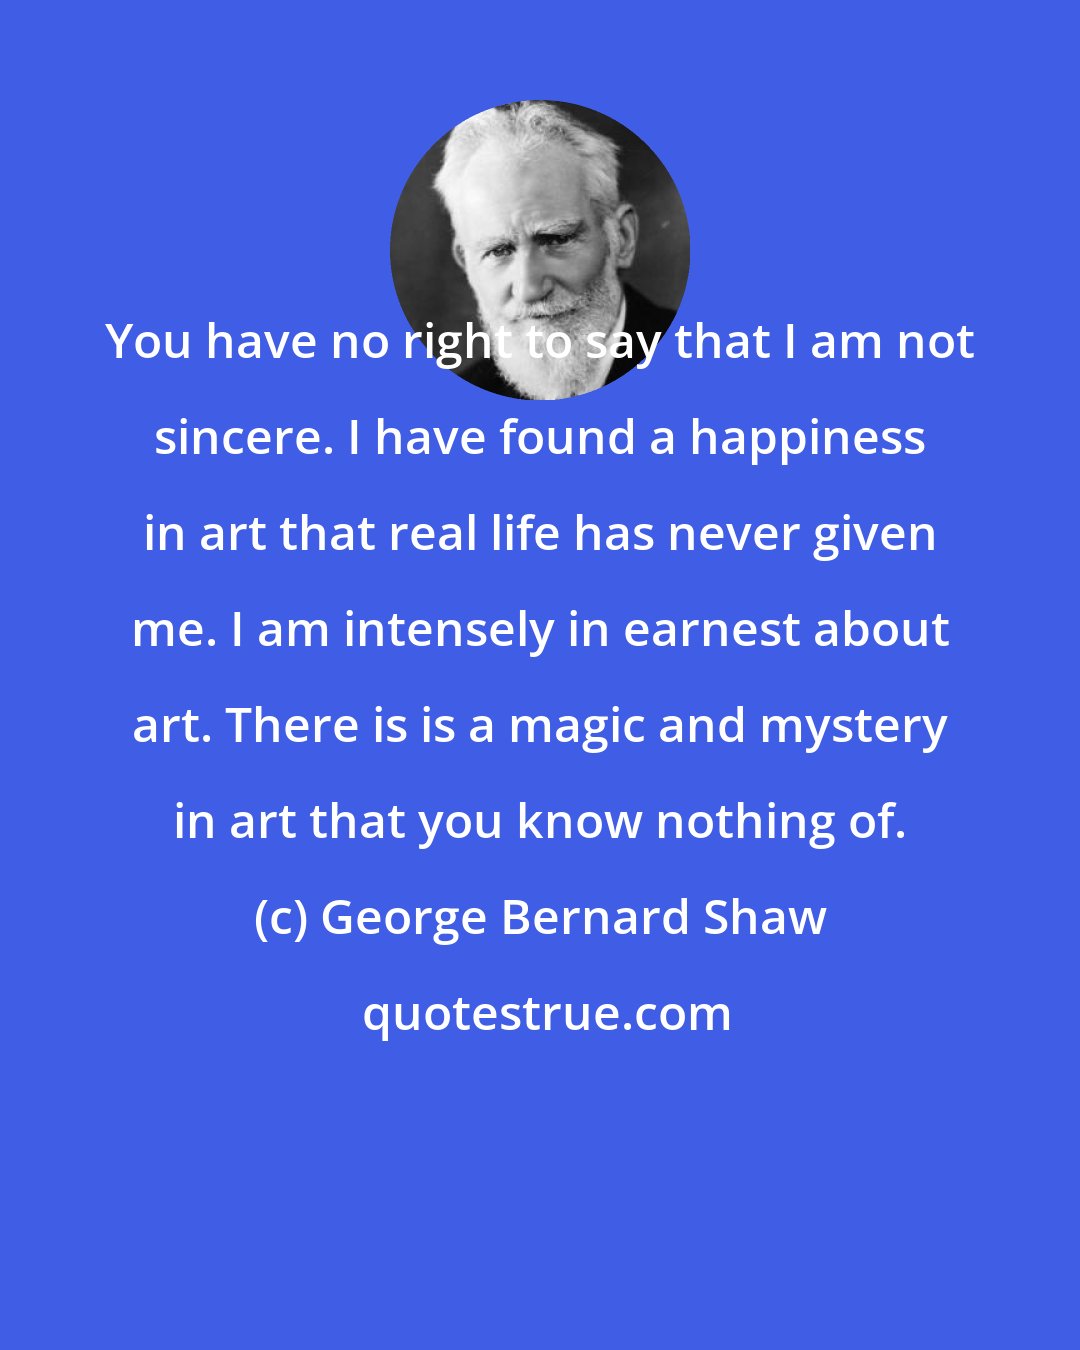 George Bernard Shaw: You have no right to say that I am not sincere. I have found a happiness in art that real life has never given me. I am intensely in earnest about art. There is is a magic and mystery in art that you know nothing of.